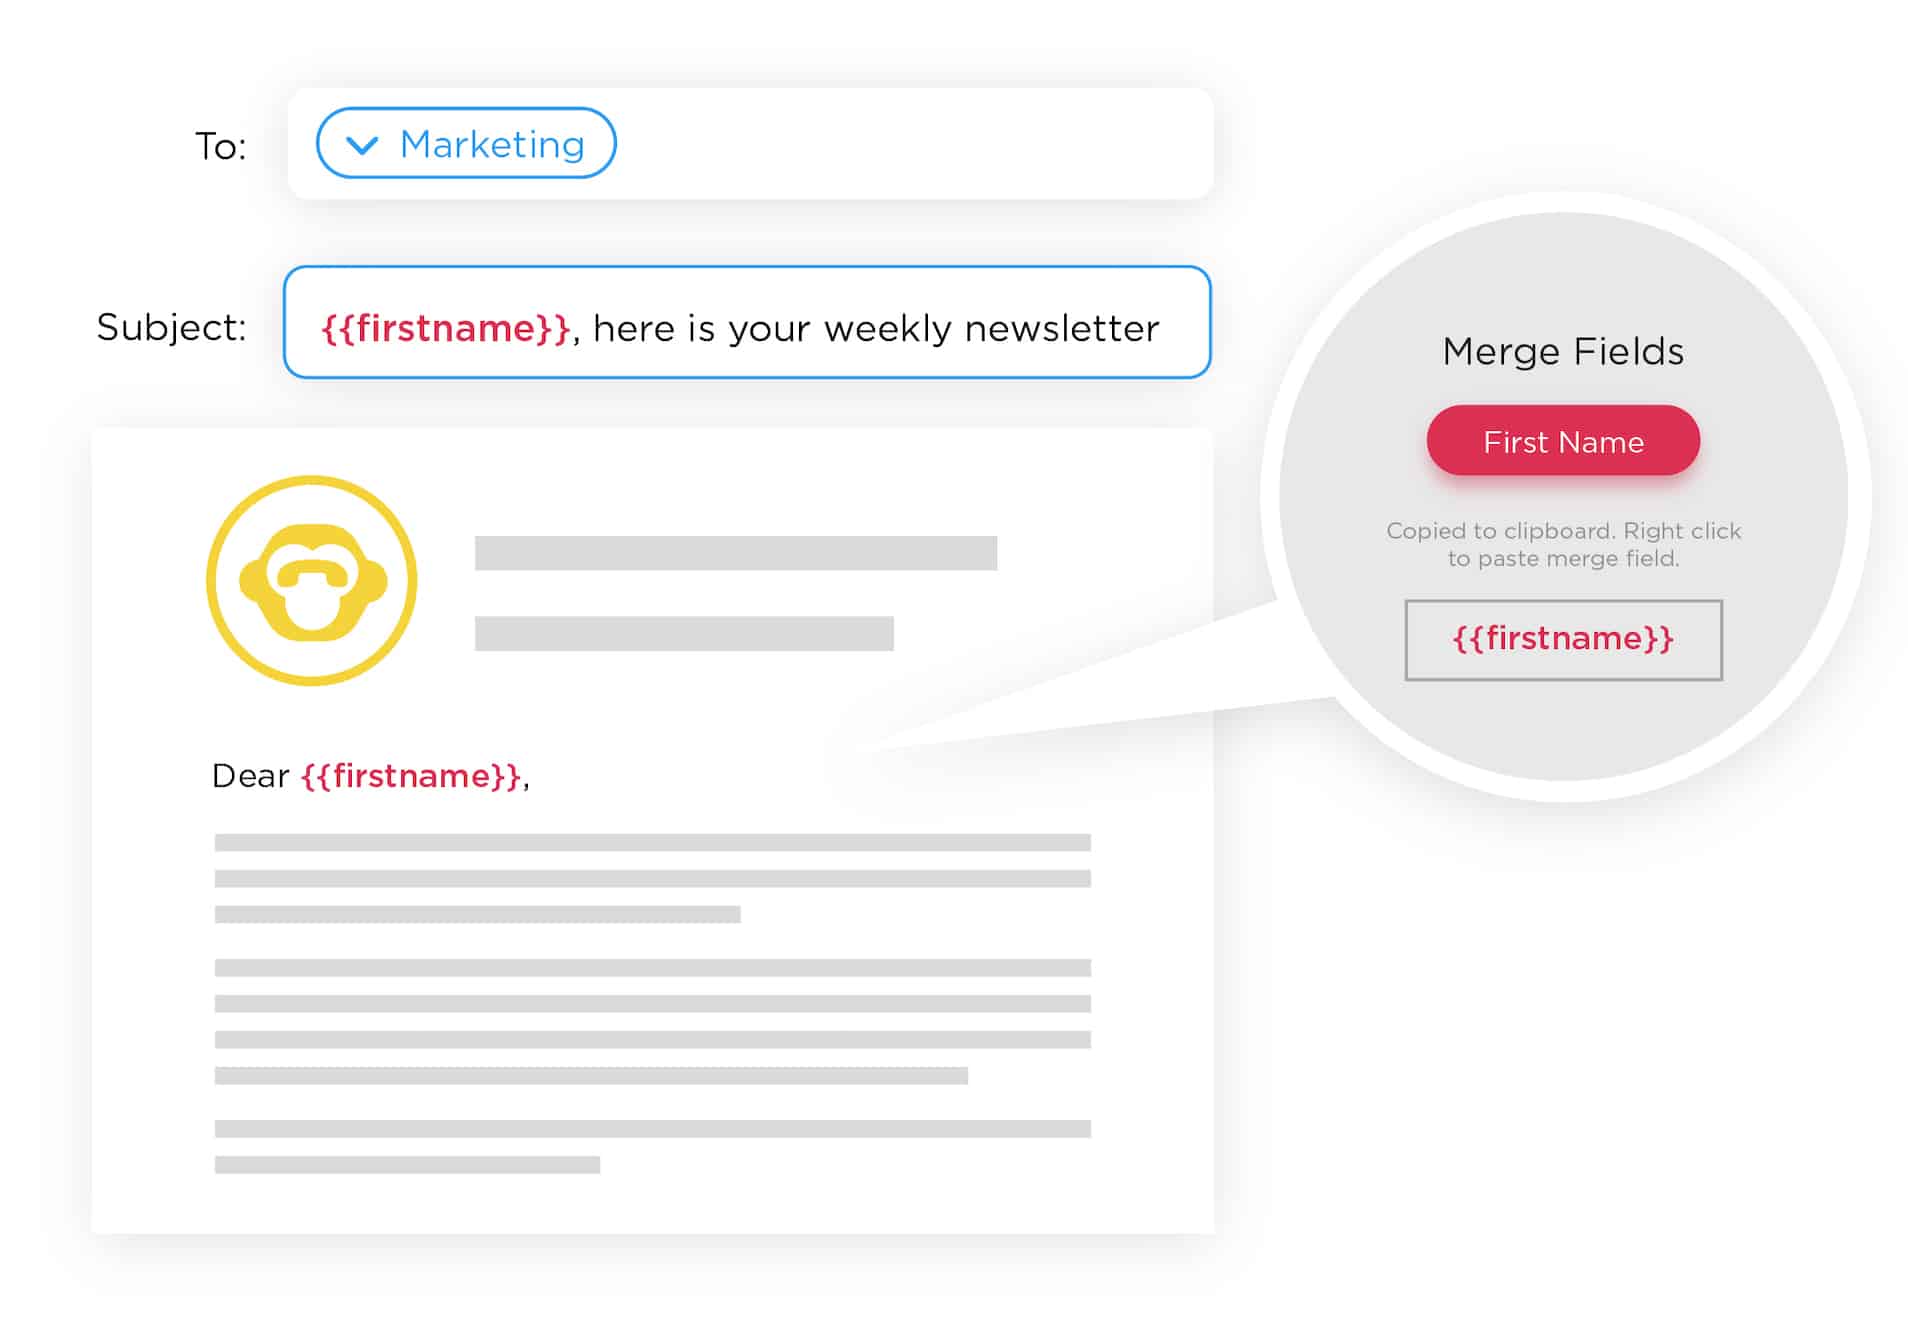 Image of merge tags added to an email for personalized text using ContactMonkey's email template builder.